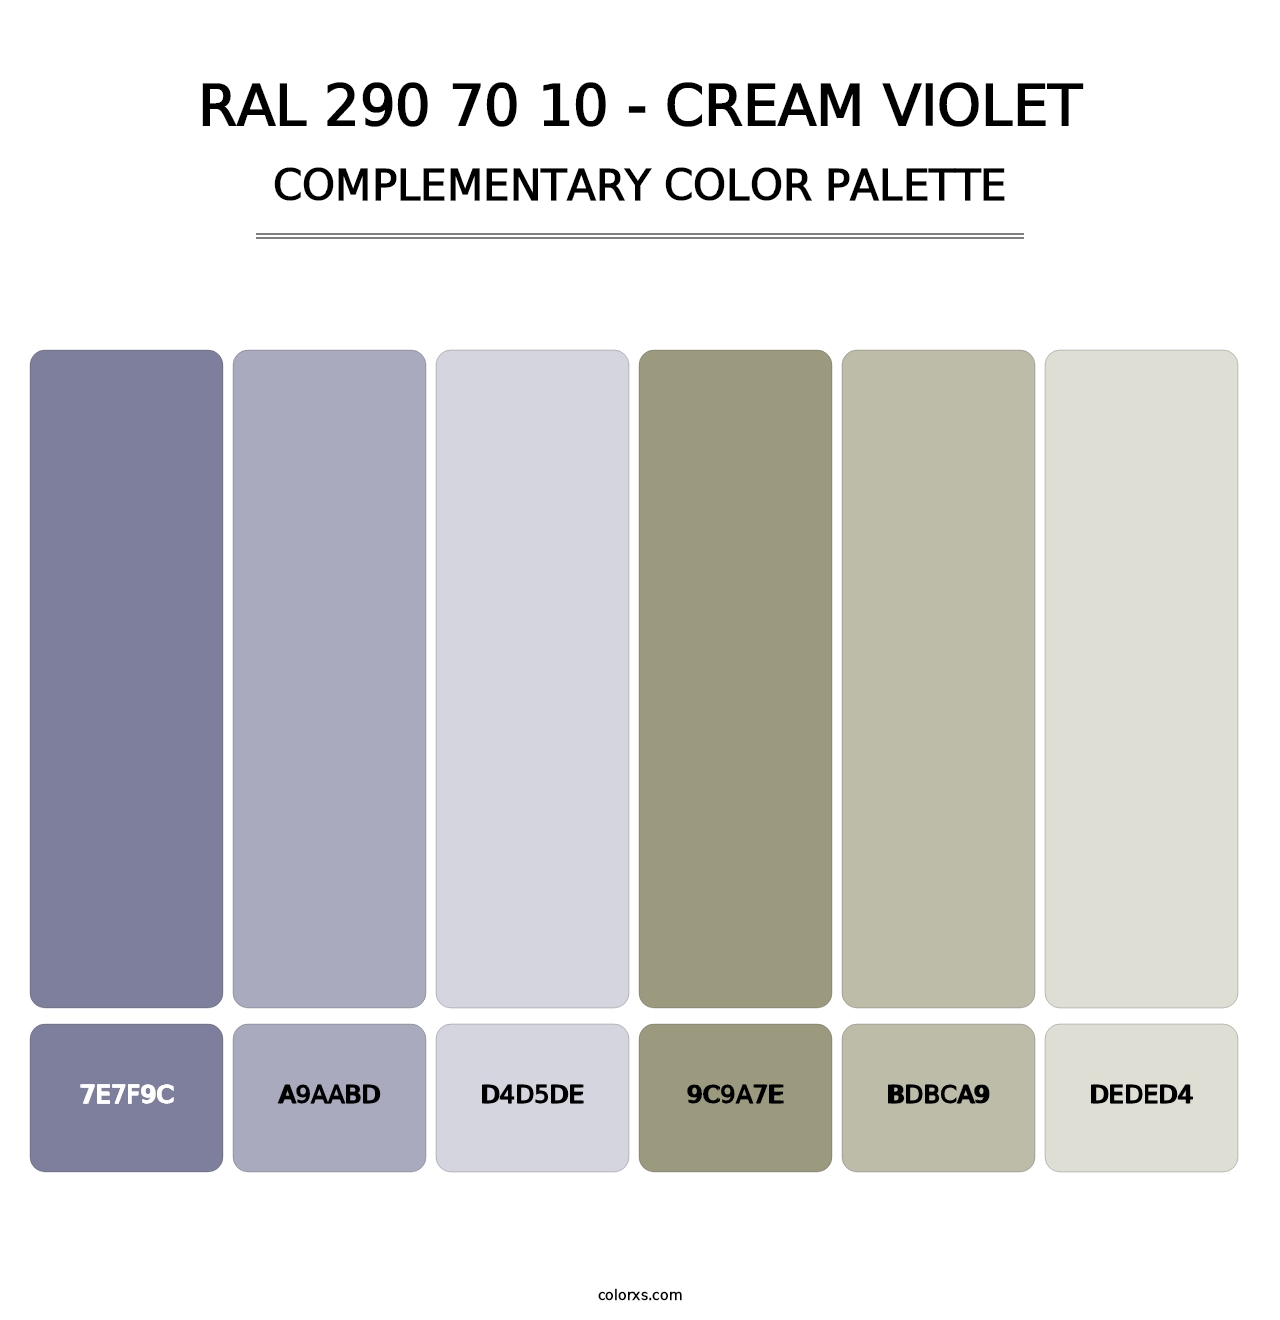 RAL 290 70 10 - Cream Violet - Complementary Color Palette